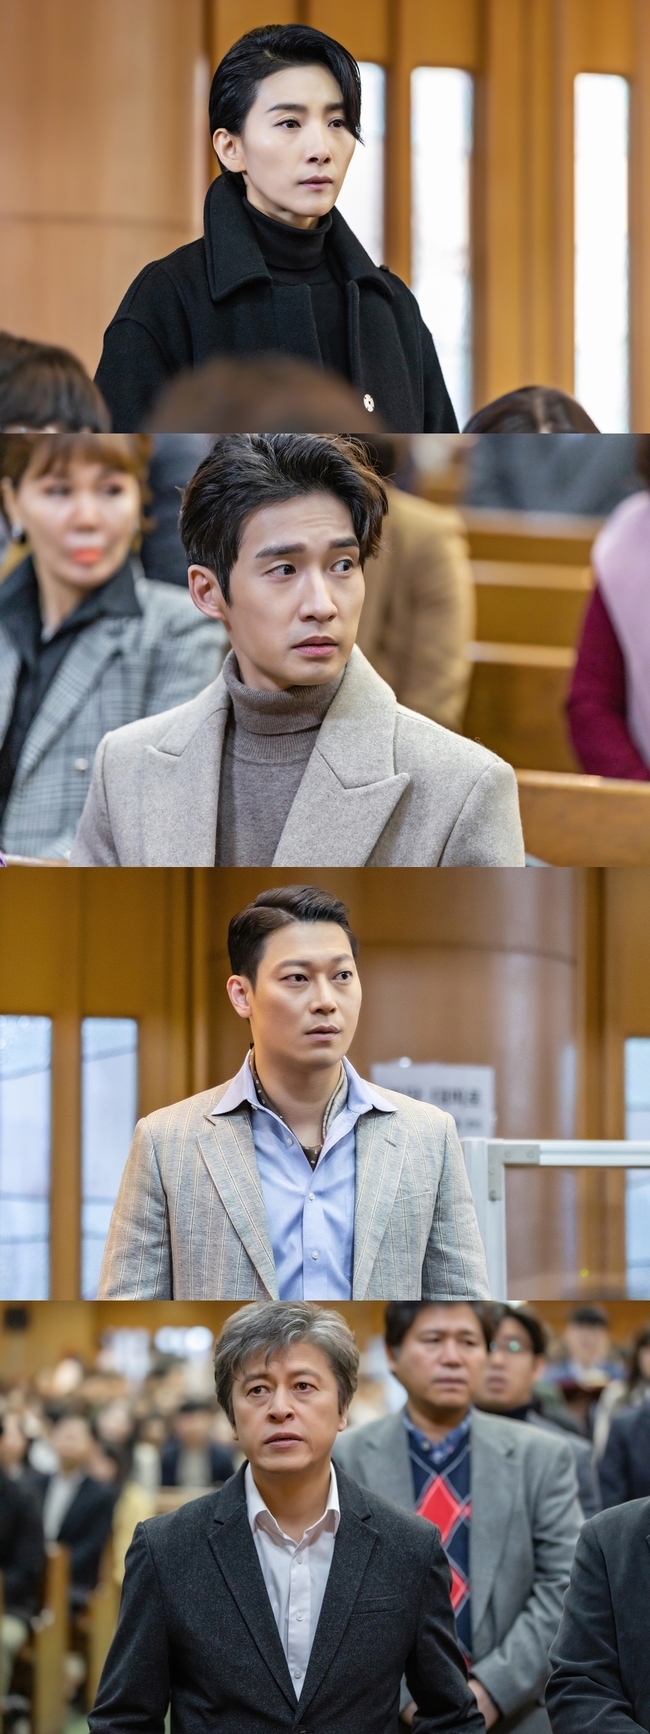 No one knows Kim Seo-hyung Ryu Duk-hwan Park Hoon Kwon Hae-hyo, 4-character face-to-face of shock unfolds.SBS monthly drama No One Knows (playplayplay by Kim Eun-hyang/directed by Lee Jung-heum) is running toward the end.Expectations are high that what story will tell the audience and what shocking and heavy message will be left for the remaining two episodes of No One, which has been bombarding a powerful story bomb in the second half.Meanwhile, on April 20, the production team of No One Knows will focus attention on the appearance of Cha Young-jin (Kim Seo-hyung), Lee Sun-woo (Ryu Duk-hwan), Baek Sang-ho (Park Hoon), and Long-term protection (Kwon Hae-hyo) gathered at meaningful places.Just because all those who are chased and chased are gathered together, the curiosity rises.In the public photos, Cha Young-jin, Lee Sun-woo, Baek Sang-ho and Long-term protection are all in what appears to be the Church of New Life.Cha is watching something without revealing his feelings, while Lee Sun-woo looks a little surprised and Baek Sang-hos face shows anger and embarrassment.Long-term protection, on the other hand, is a strong and rugged look as if it were a firm decision, which causes curiosity about what will happen later.Previously, Cha Young-jin and Lee Sun-woo found out that Baek Sang-ho was a murderer through the memories of Ko Eun-ho, and that he was aiming for Ko Eun-ho.So Cha Young-jin promised to catch Baek Sang-ho and Lee Sun-woo vowed to protect Ko Eun-ho.To this end, Cha Young-jin joined hands with Long-term protection, who held the Secret to Amail Baek Sang-ho, and began to pursue The Secret in the Gospel of New Life.On the other hand, Baek Sang-ho also noticed the unusual flow and started to move.He is looking for a long-term protection to hide his weaknesses that have not yet been revealed to the world, and is closely watching Ko Eun-ho to pressure him at any time.He also threatened Lee Sun-woo with his students to get the Gospel of New Life containing The Secret.Four people gathered in what seemed to be the church of the new life in the situation of being chased and chased.How does this four-way face-to-face affect the development of the no one knows running toward the end? I wonder and wait for the fifteen no one knows times.kim myeong-mi